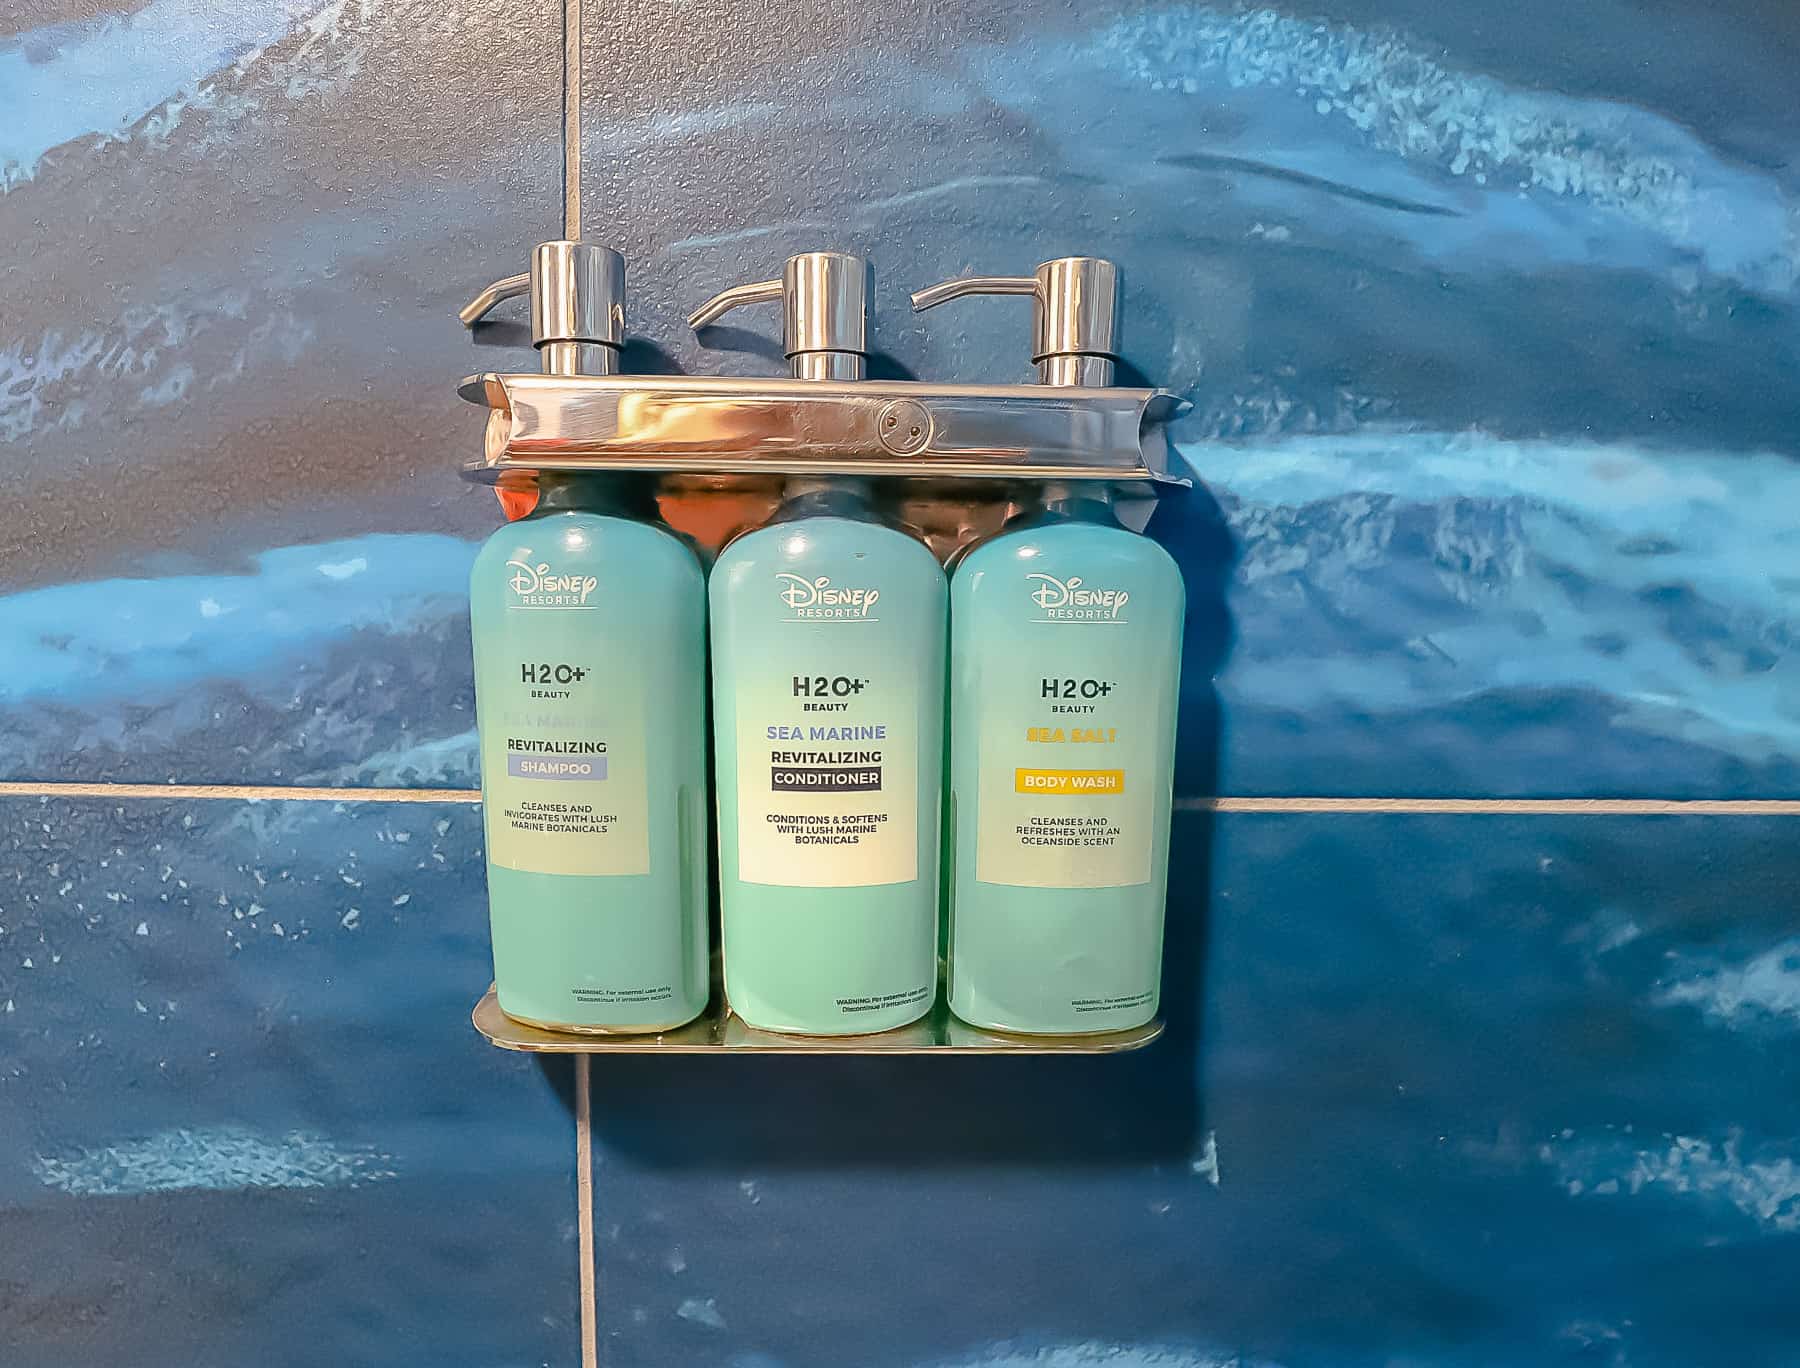 built-in toiletries like shampoo, conditioner, body wash 